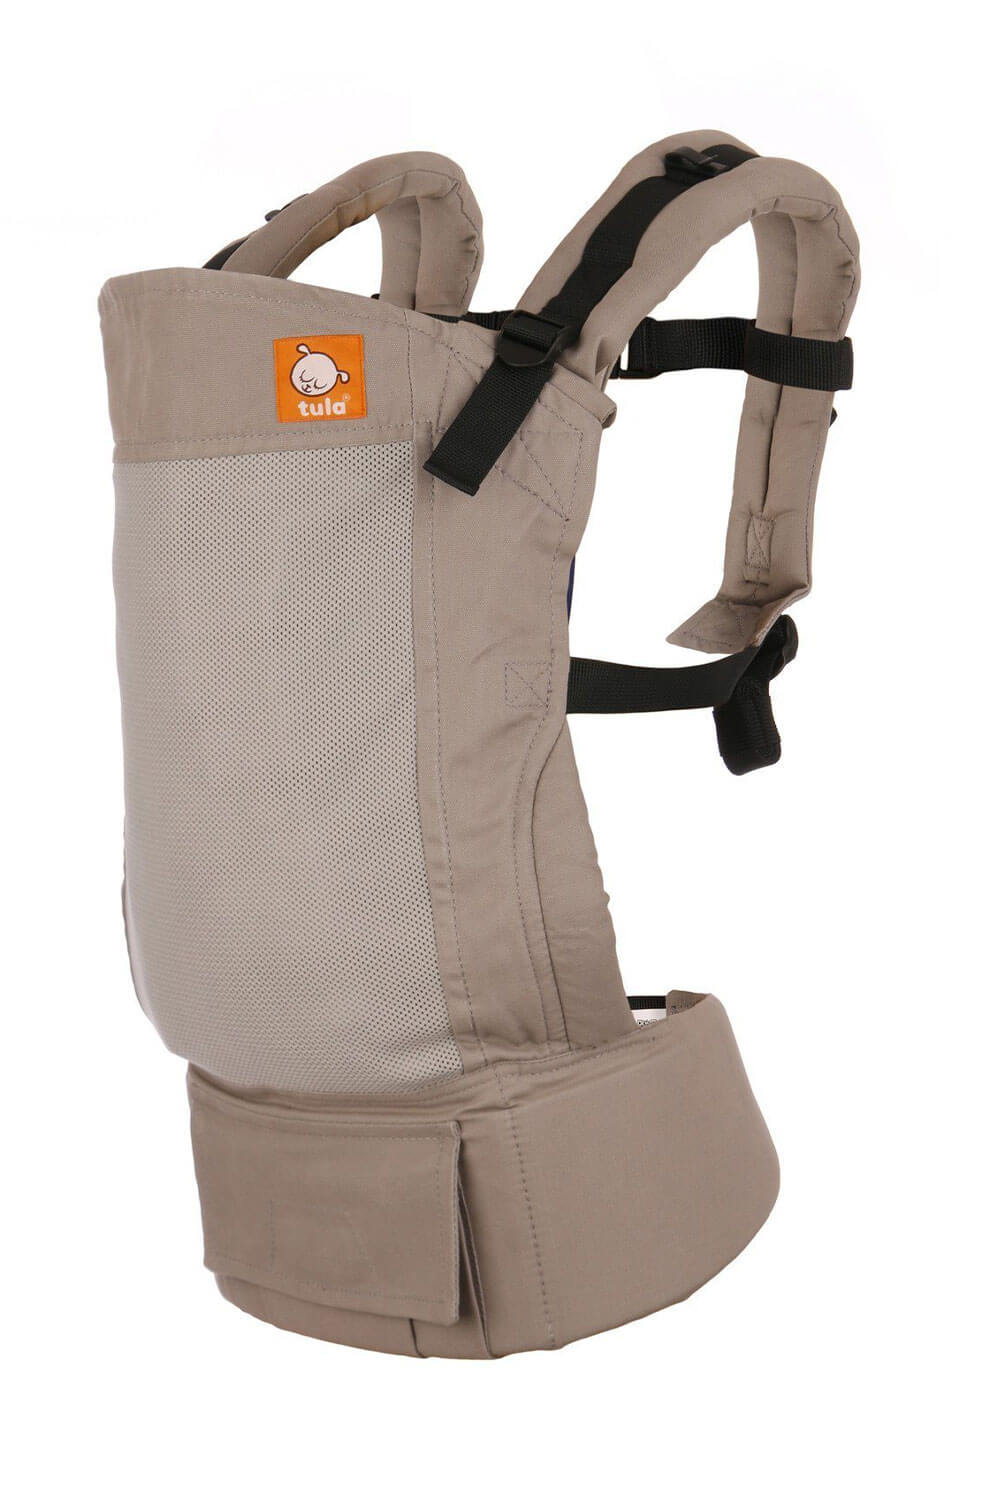 Cloudy Tula Ergonomic Carrier Baby 